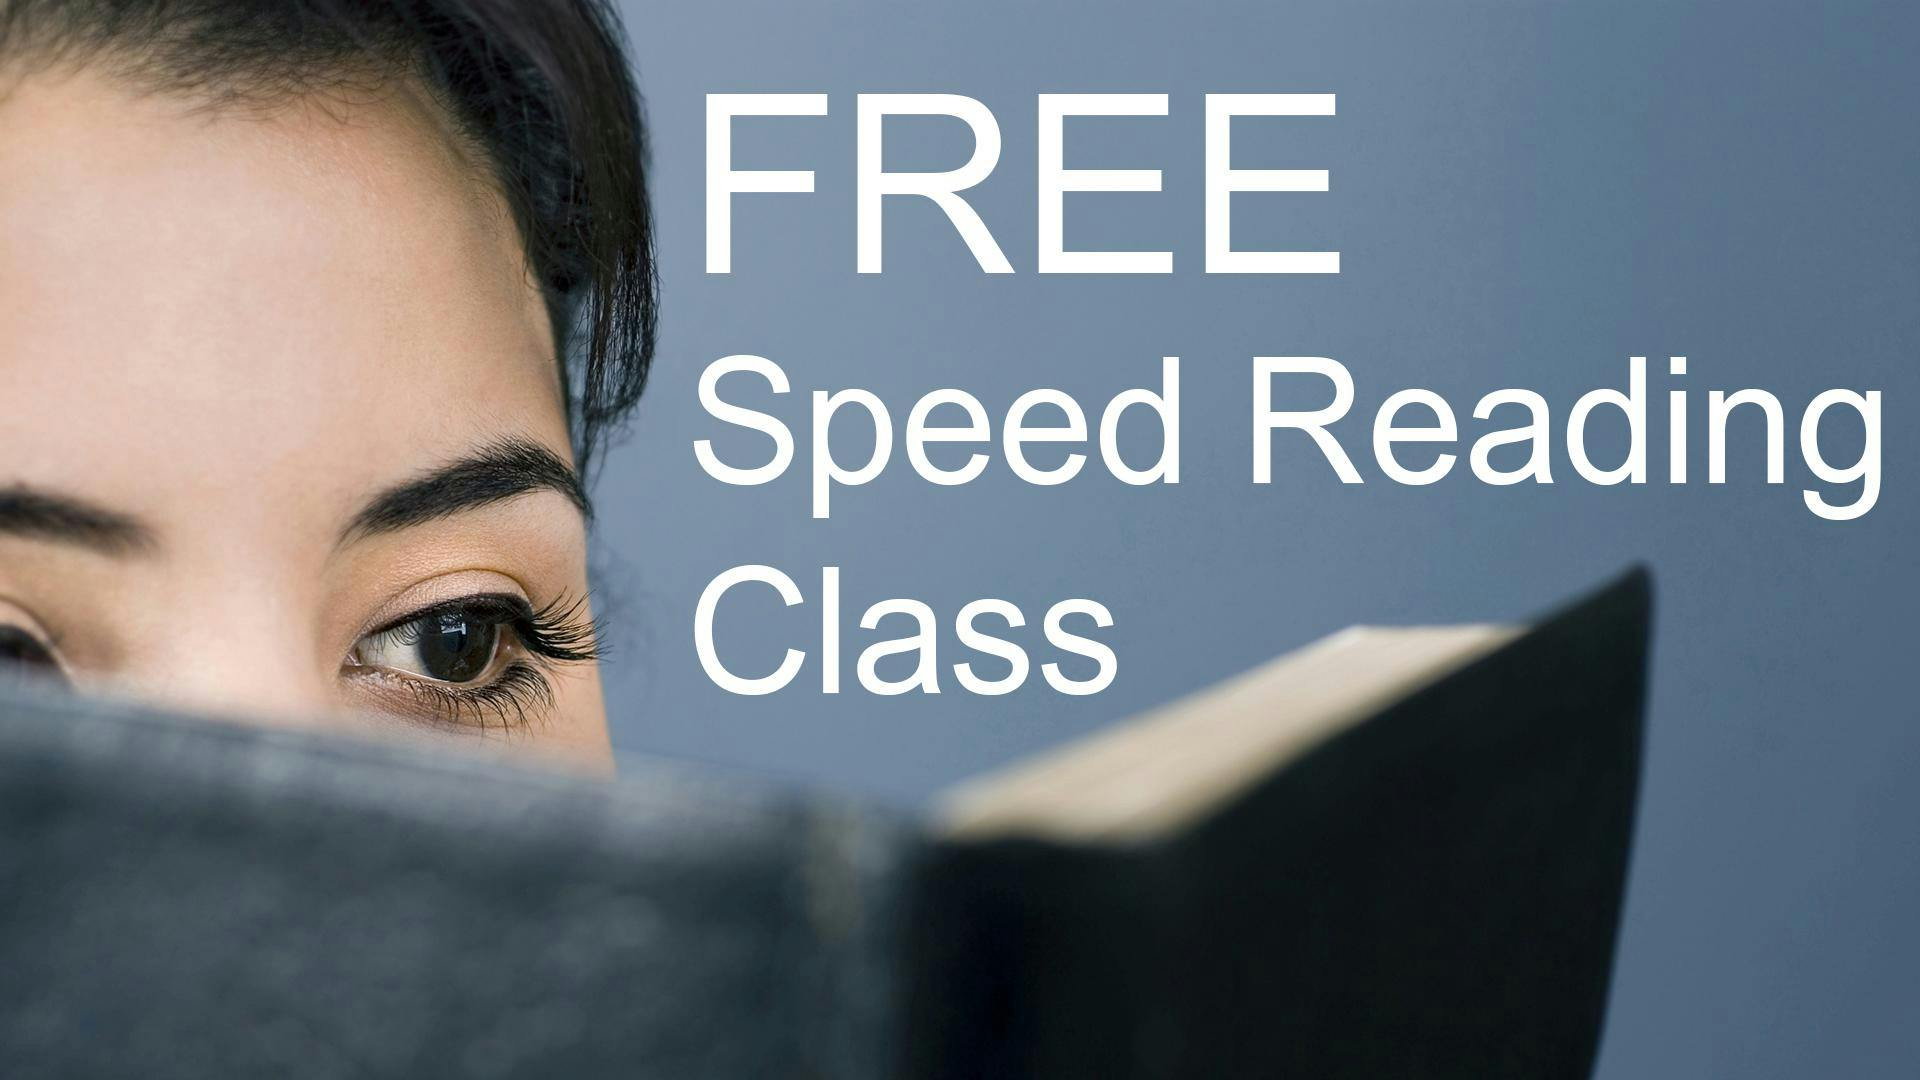 Free Speed Reading Class - Rochester